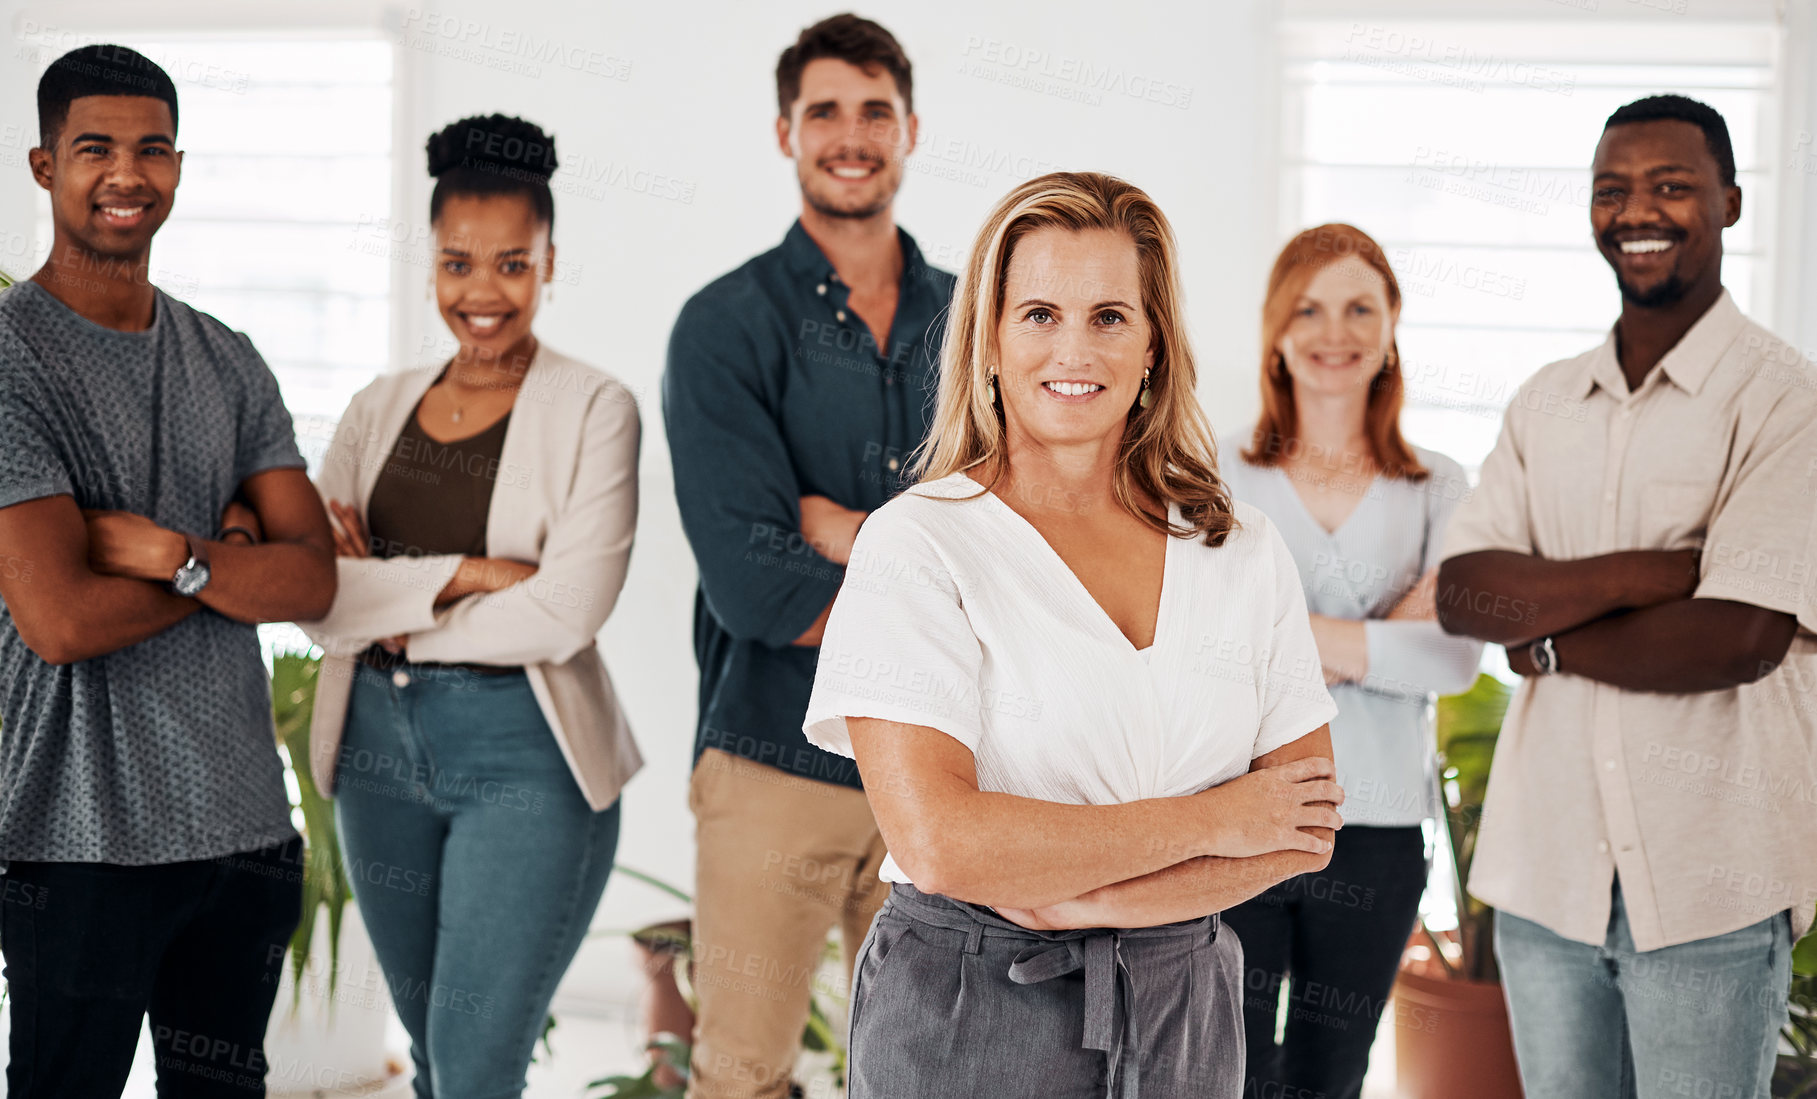 Buy stock photo Portrait of a mature businesswoman standing in an office with her colleagues in the background